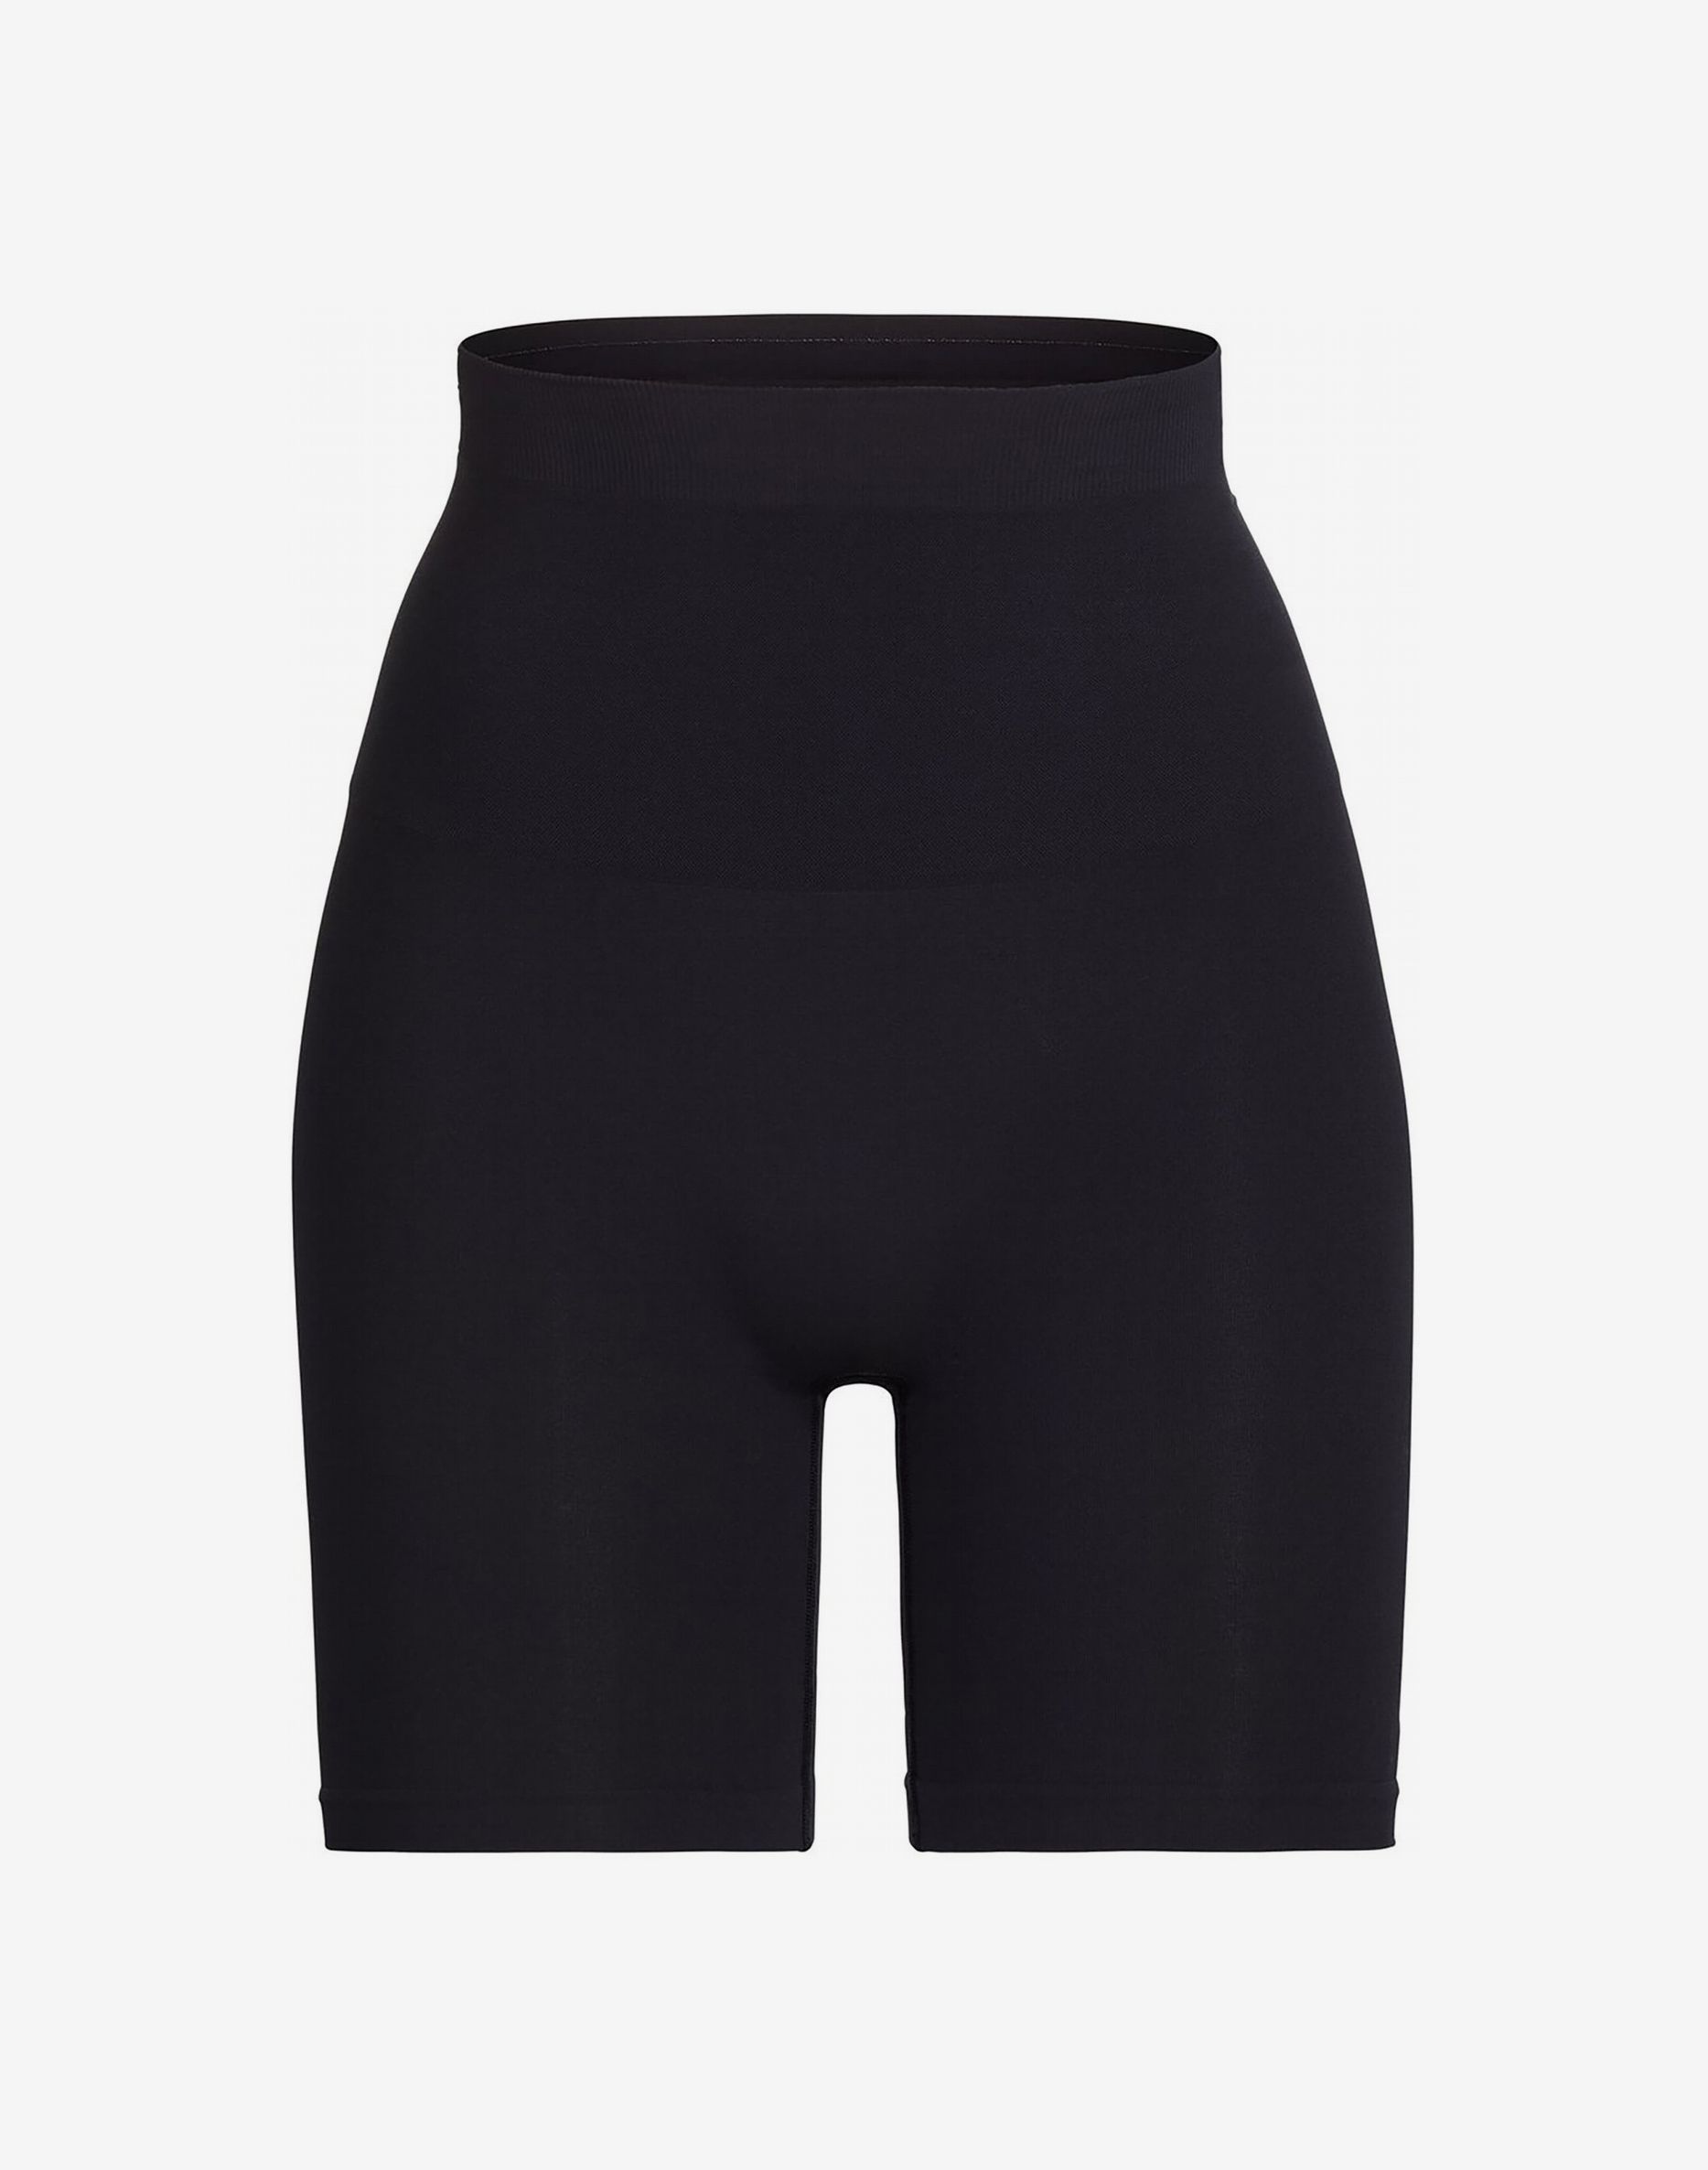 I have 'full thighs' & found the best anti-chafing shorts - they gave my  sweaty legs some much-needed relief